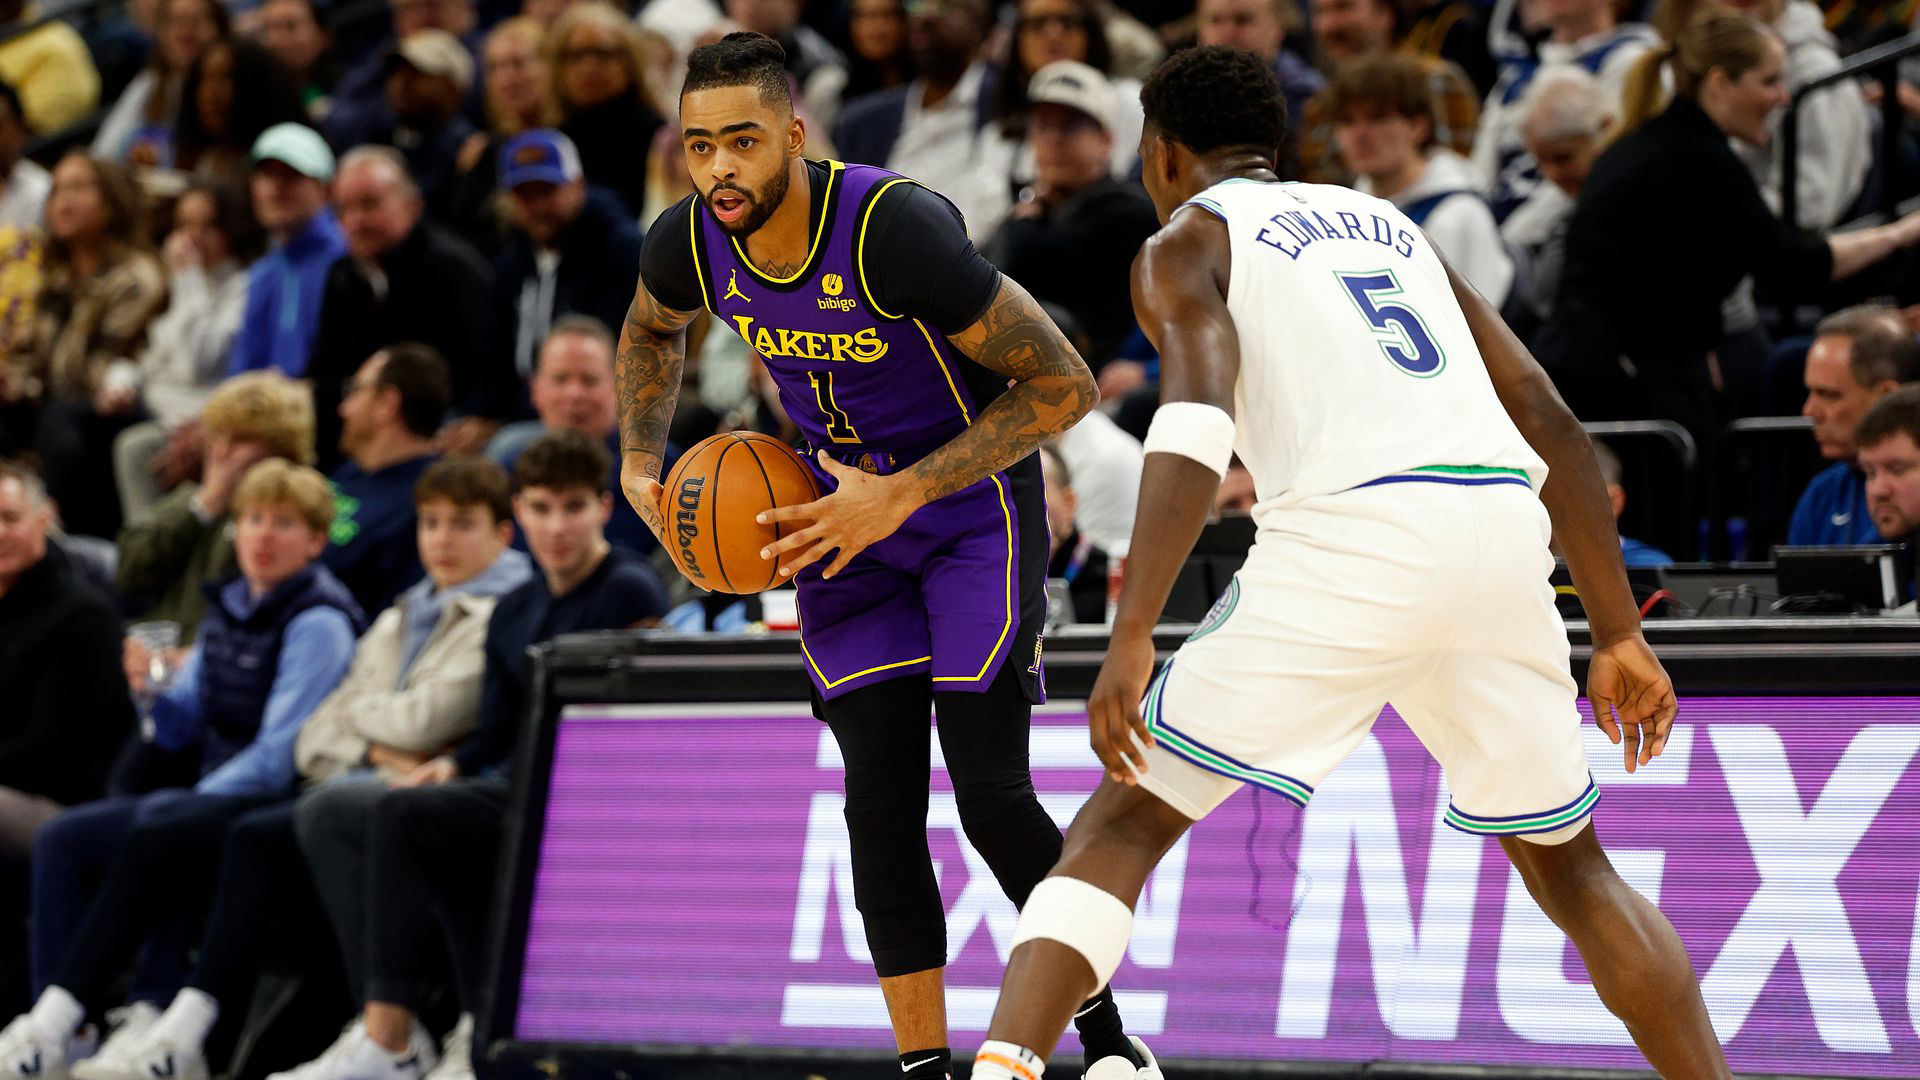 Lakers vs. Timberwolves Preview and Game Thread Can L.A. tie the